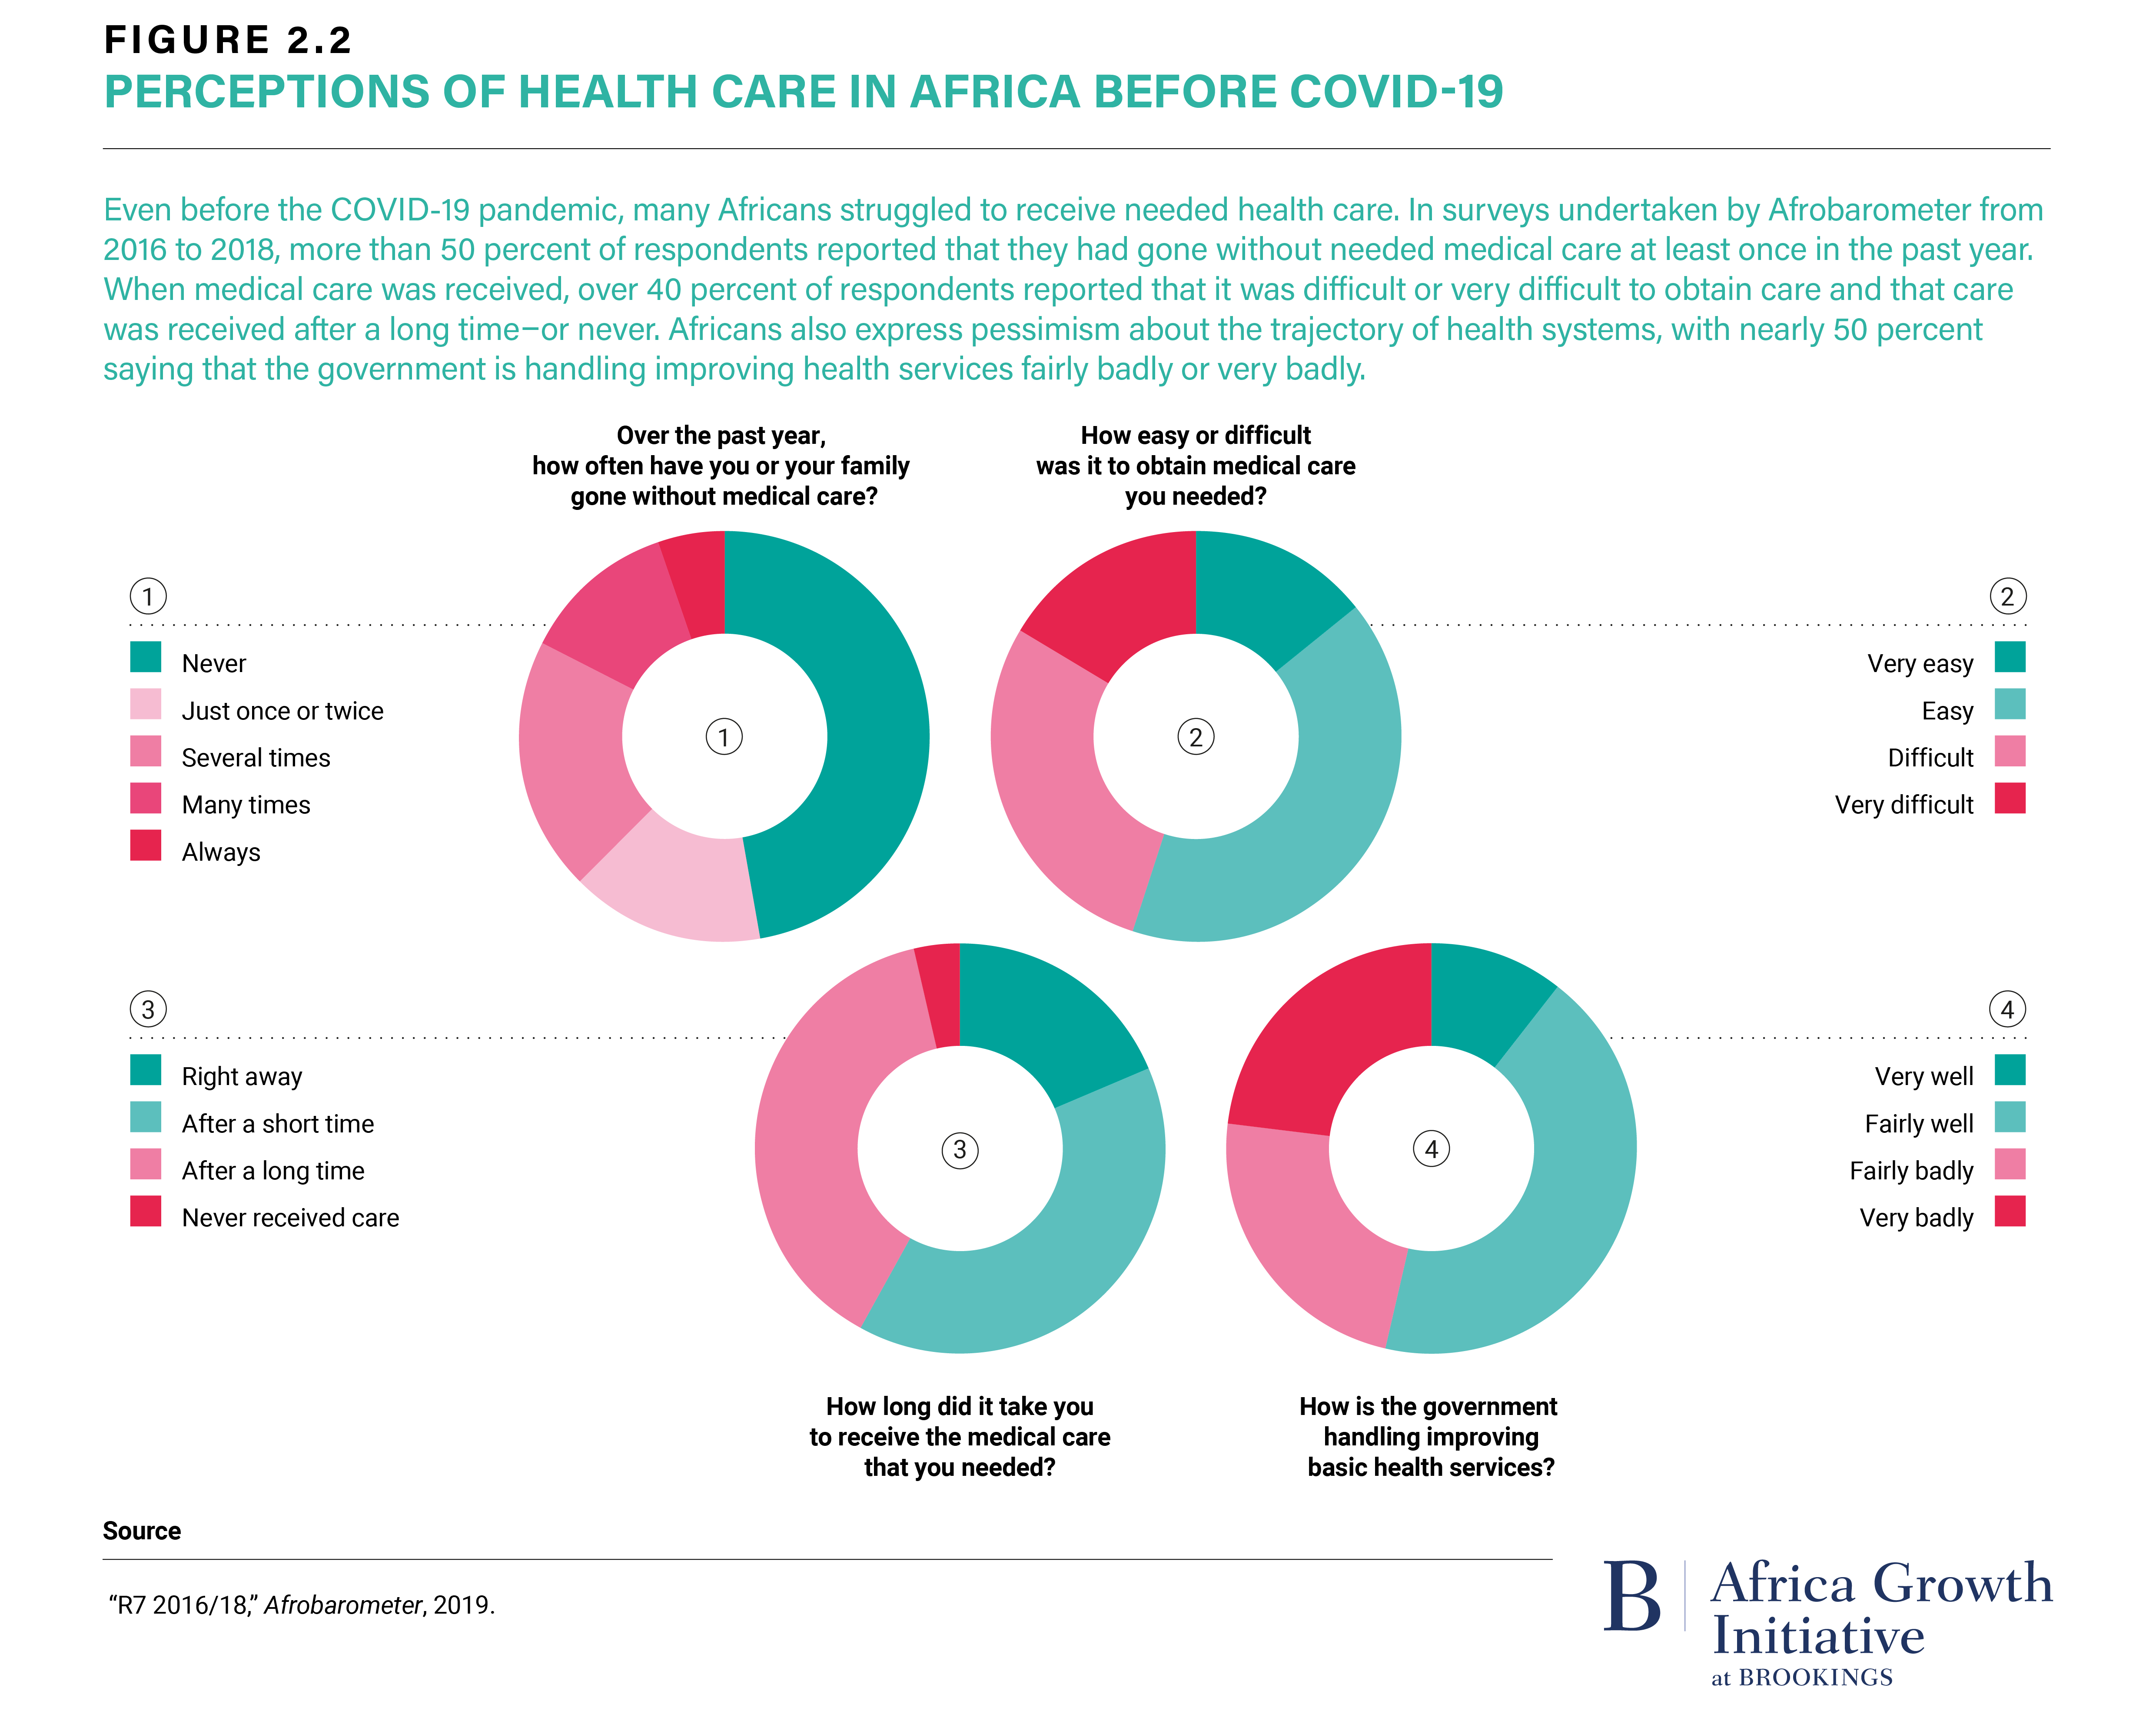 Figure 2.2 Perceptions of Health Care in Africa Before COVID-19